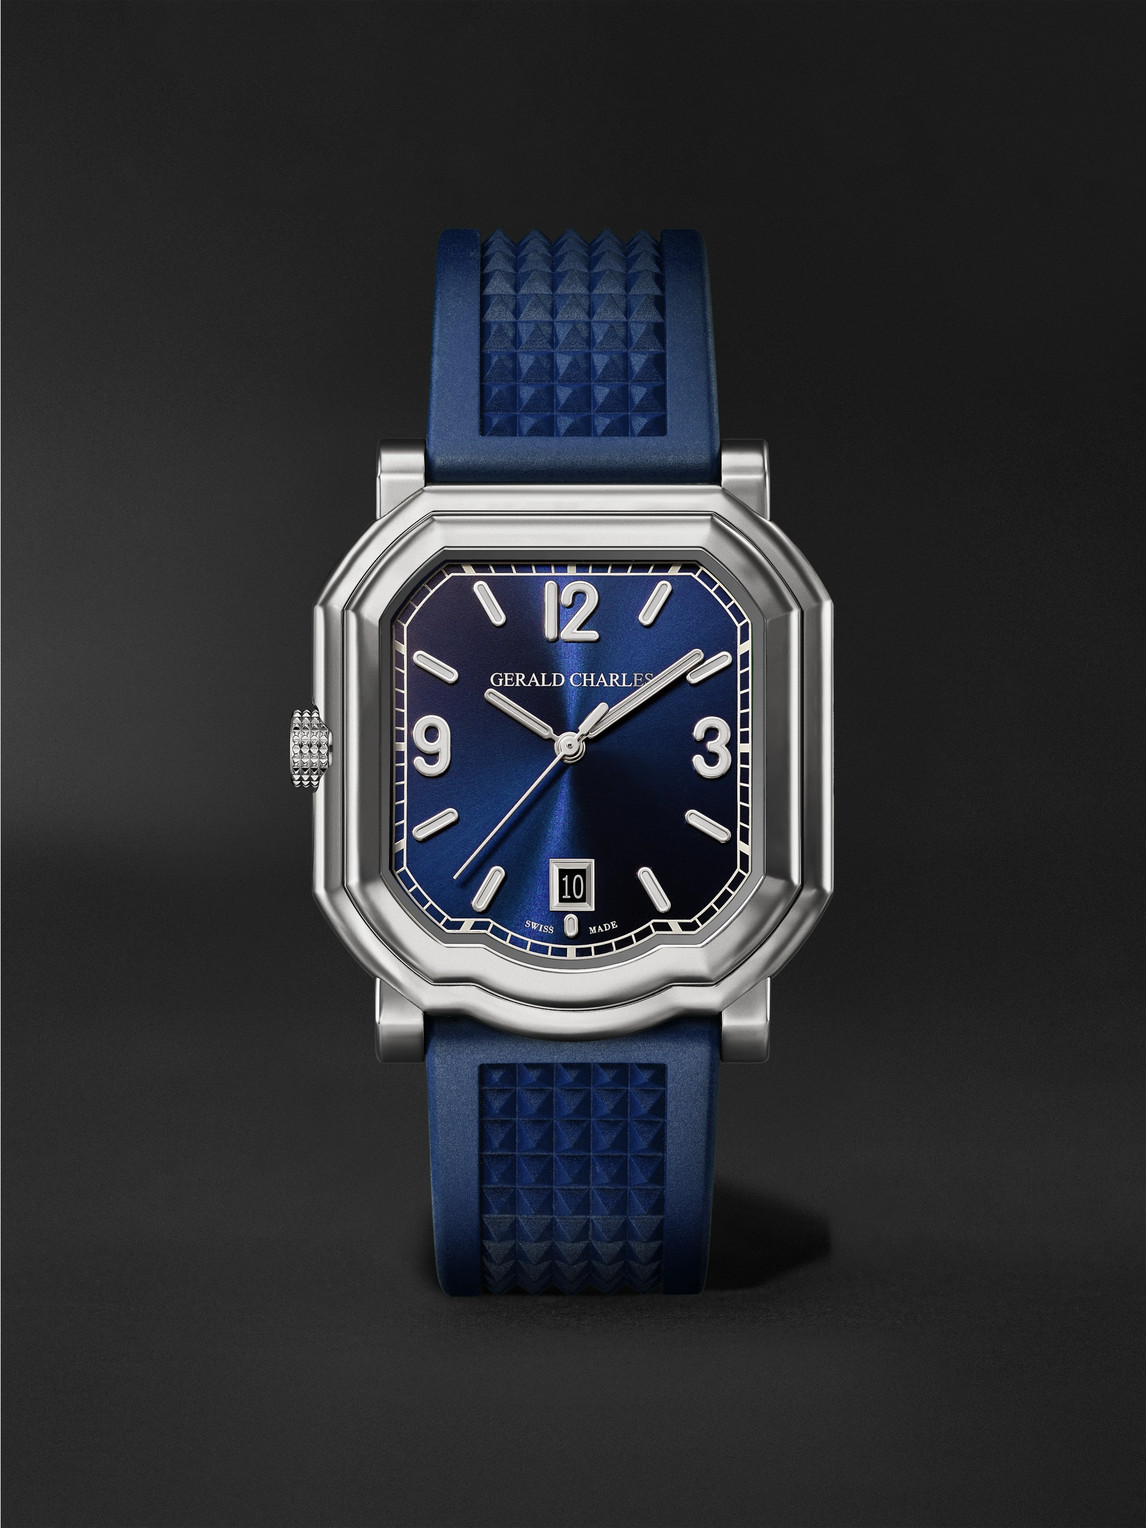 Gerald Charles Gc Sport Automatic 39mm Titanium And Rubber Watch, Ref. No. Gc2.0-tx-tn-01 In Blue